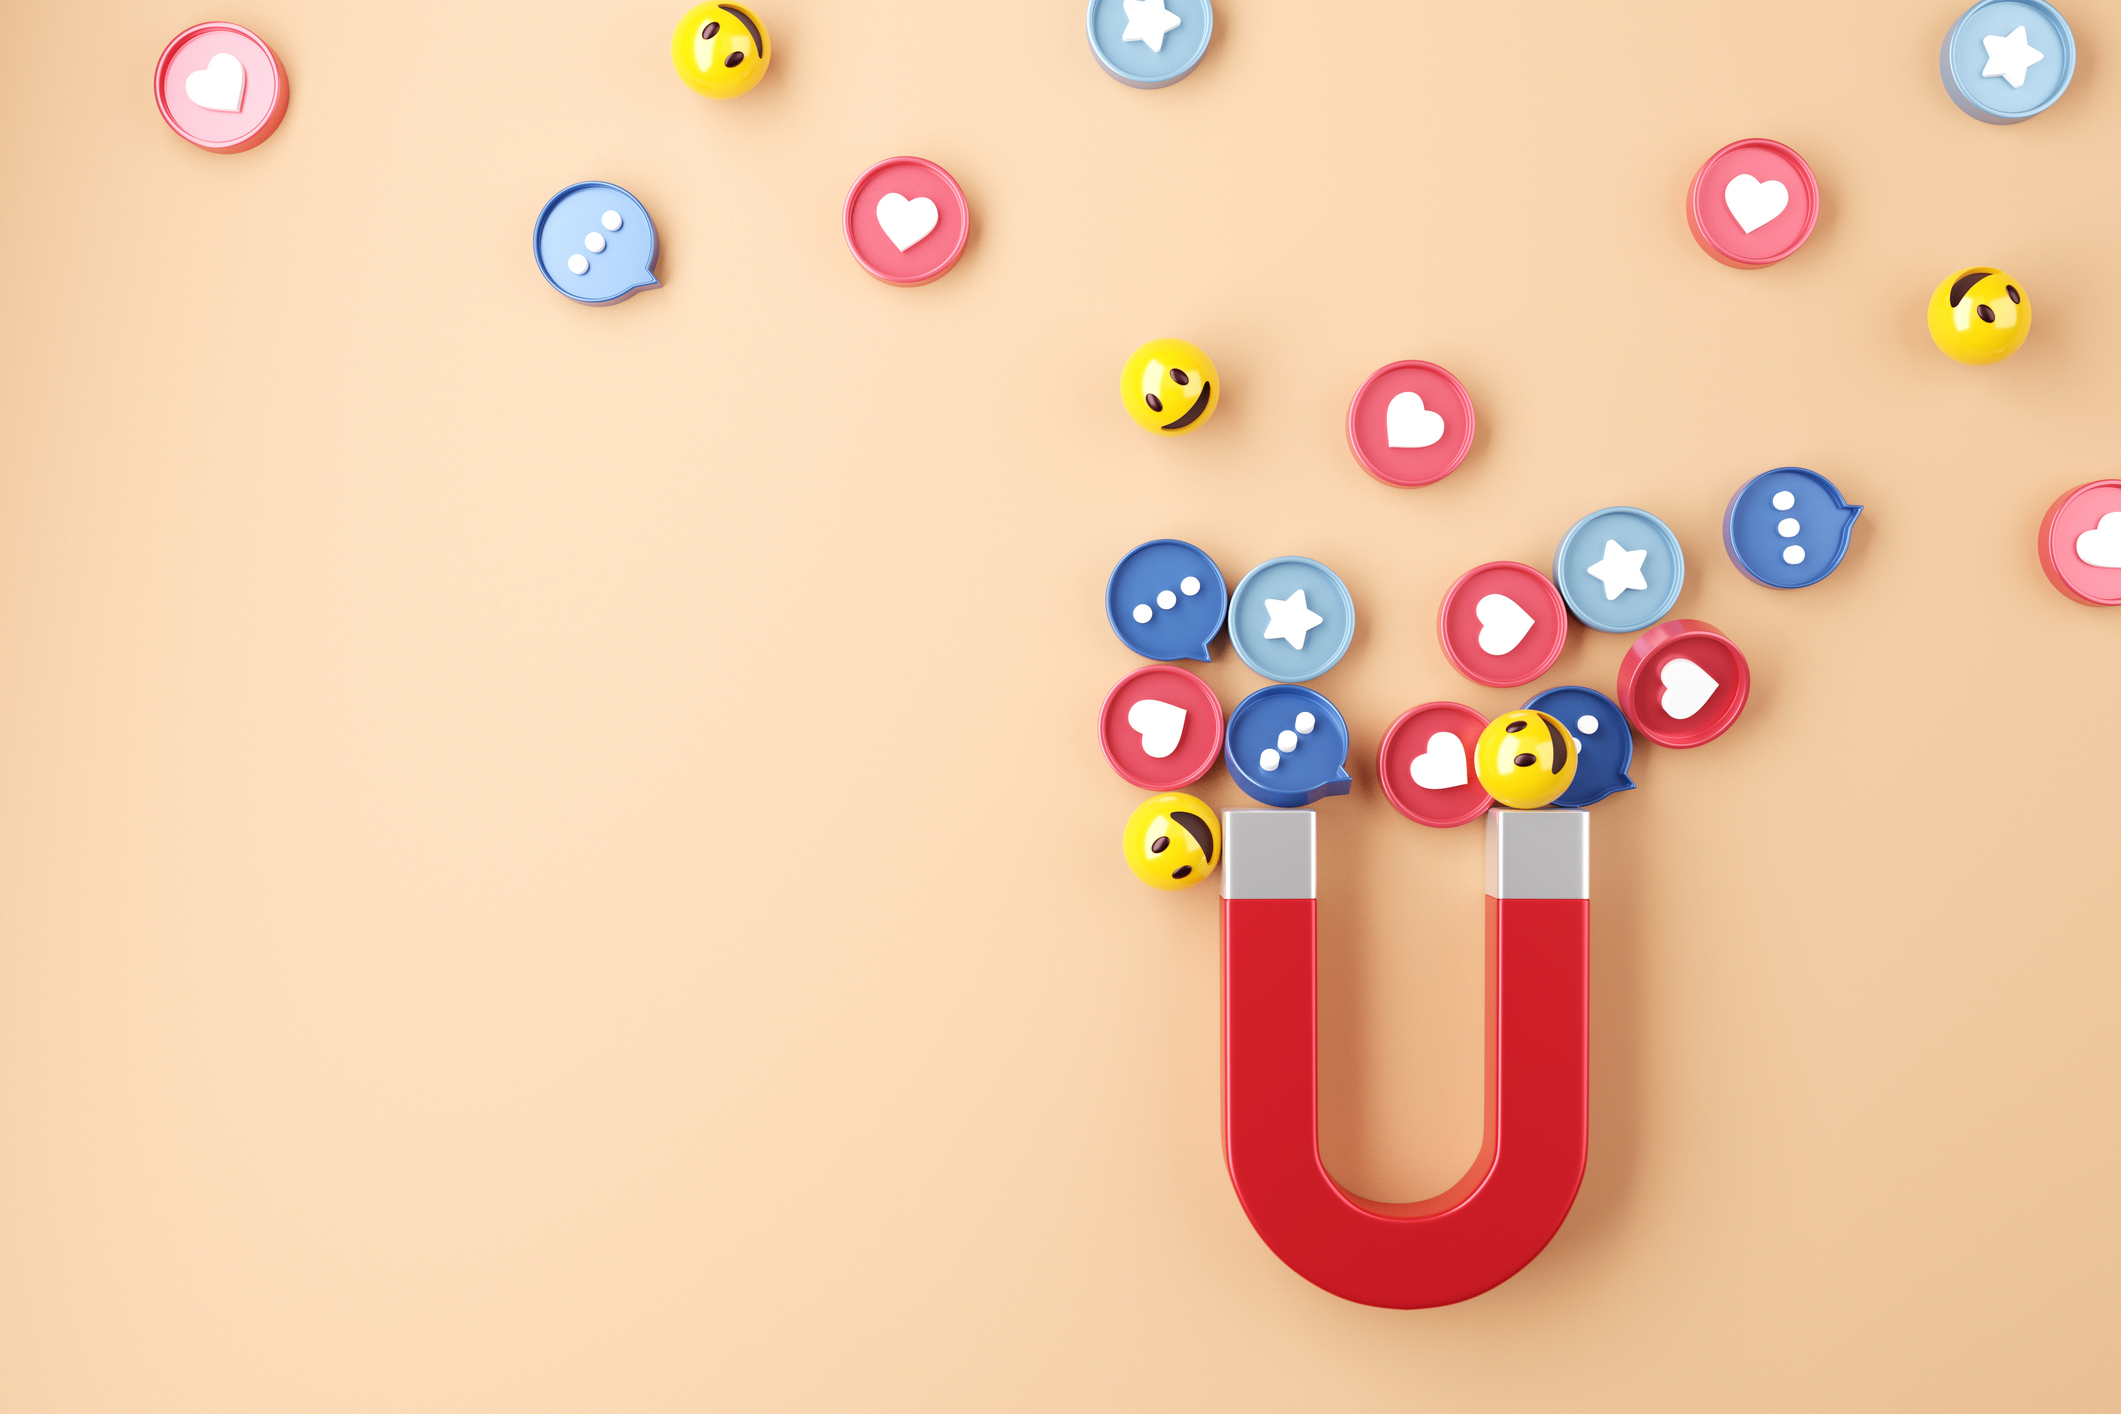 Stock image graphic of u-shaped magnet attracting small social media heart, comment and smiling buttons